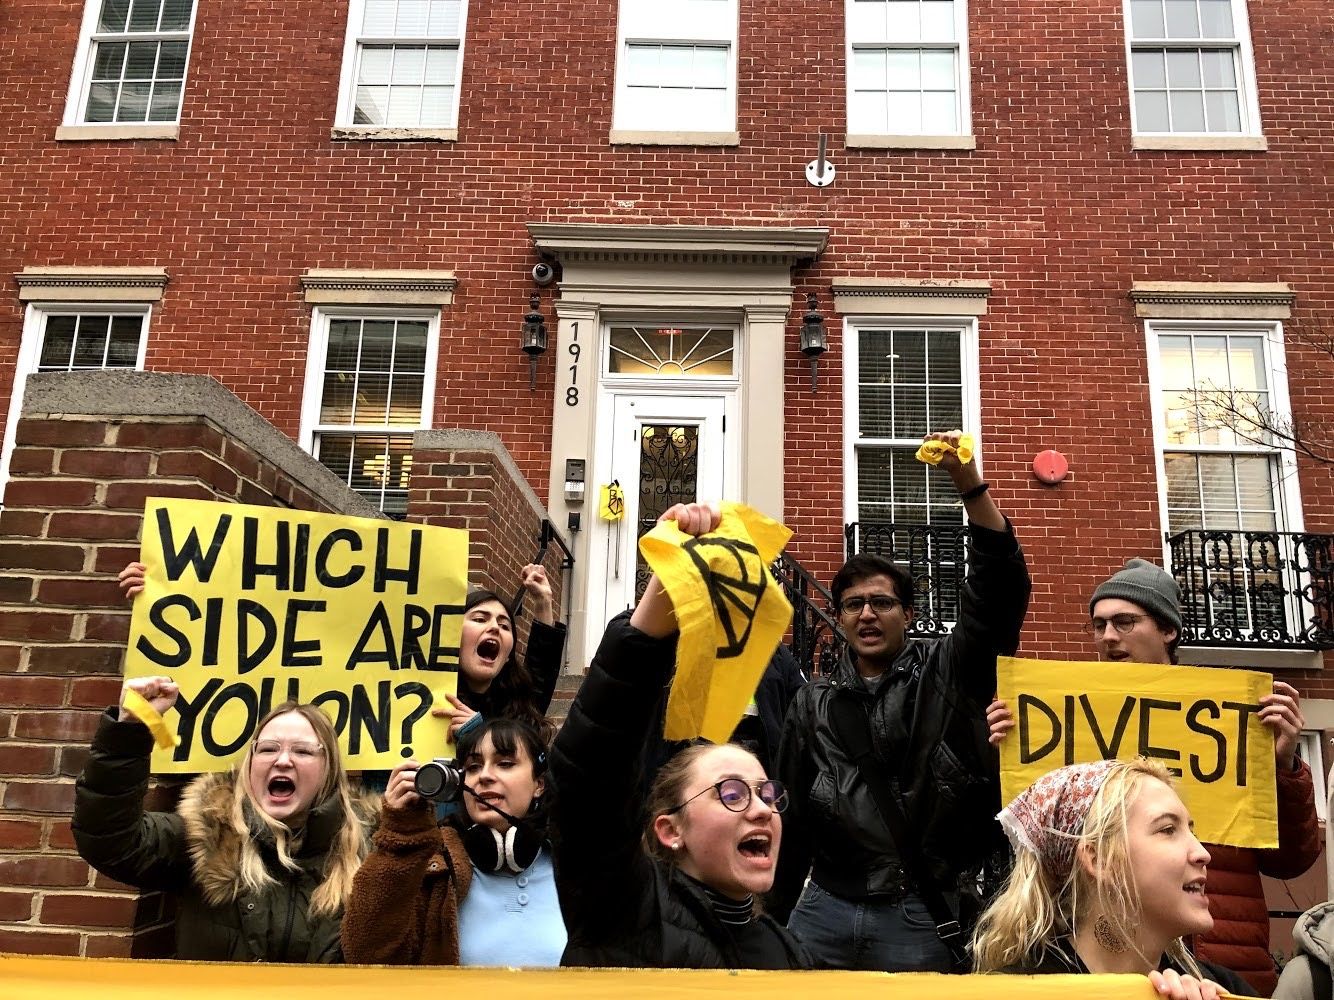 George Washington University students call for divestment from fossil fuels